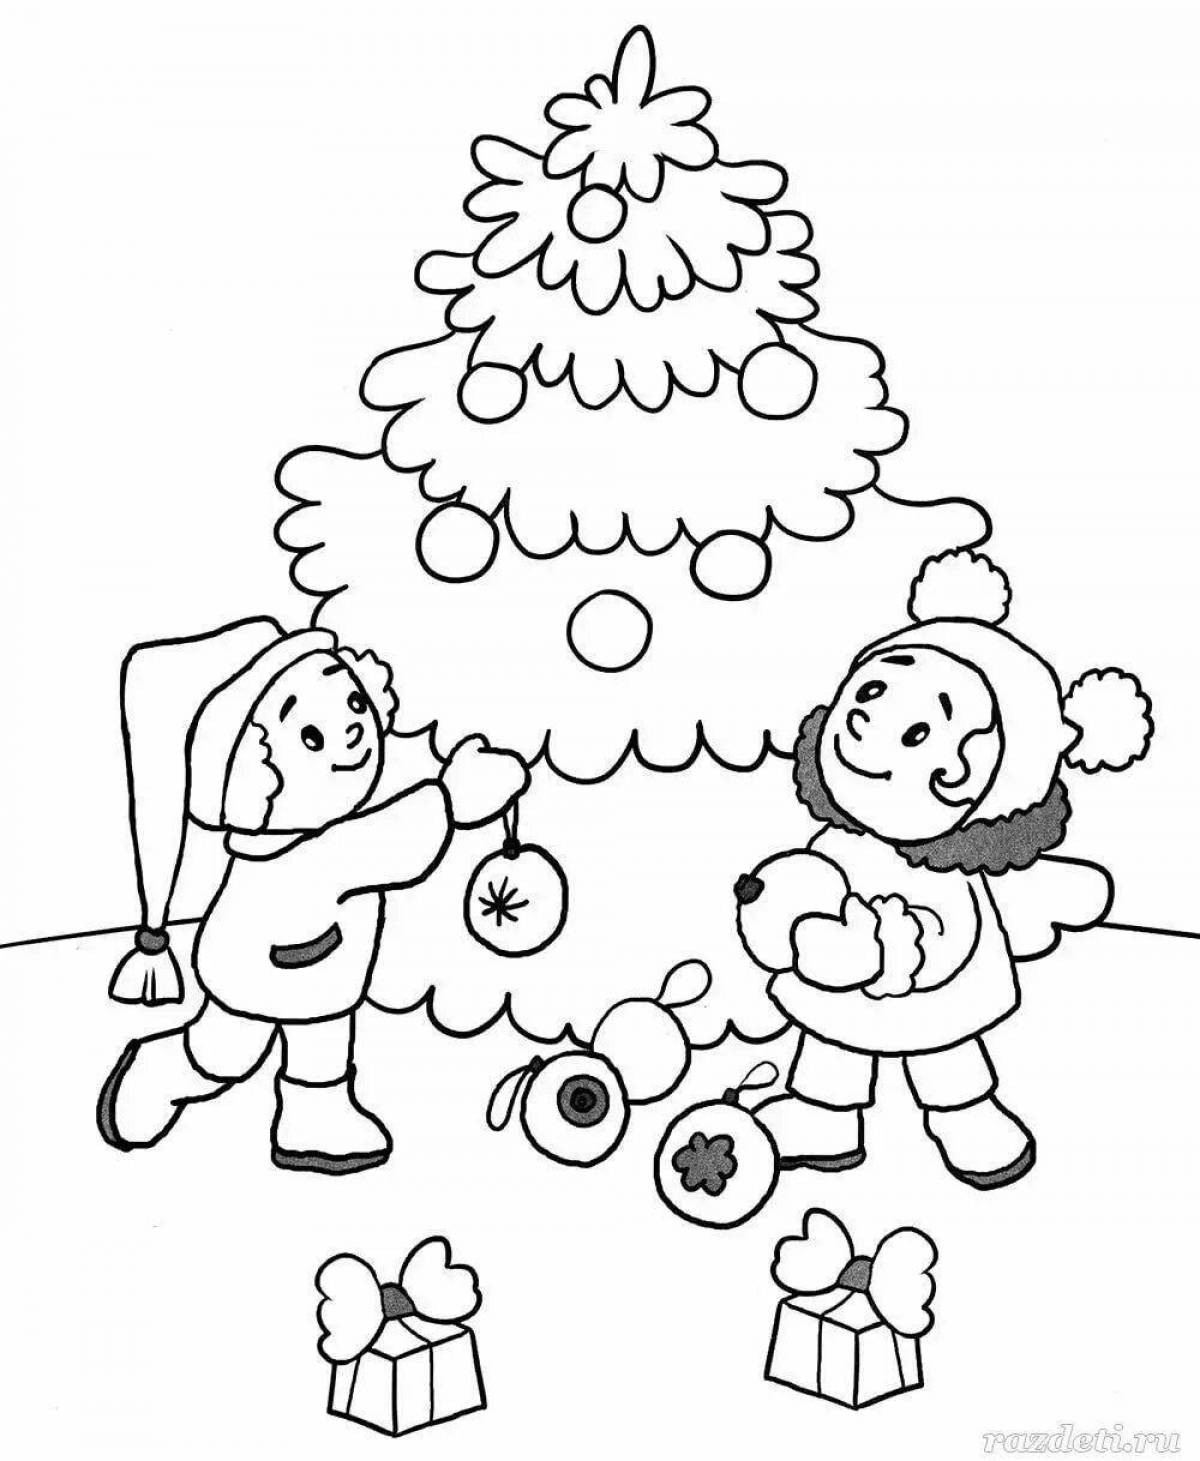 Colourful winter coloring book for children 3-4 years old